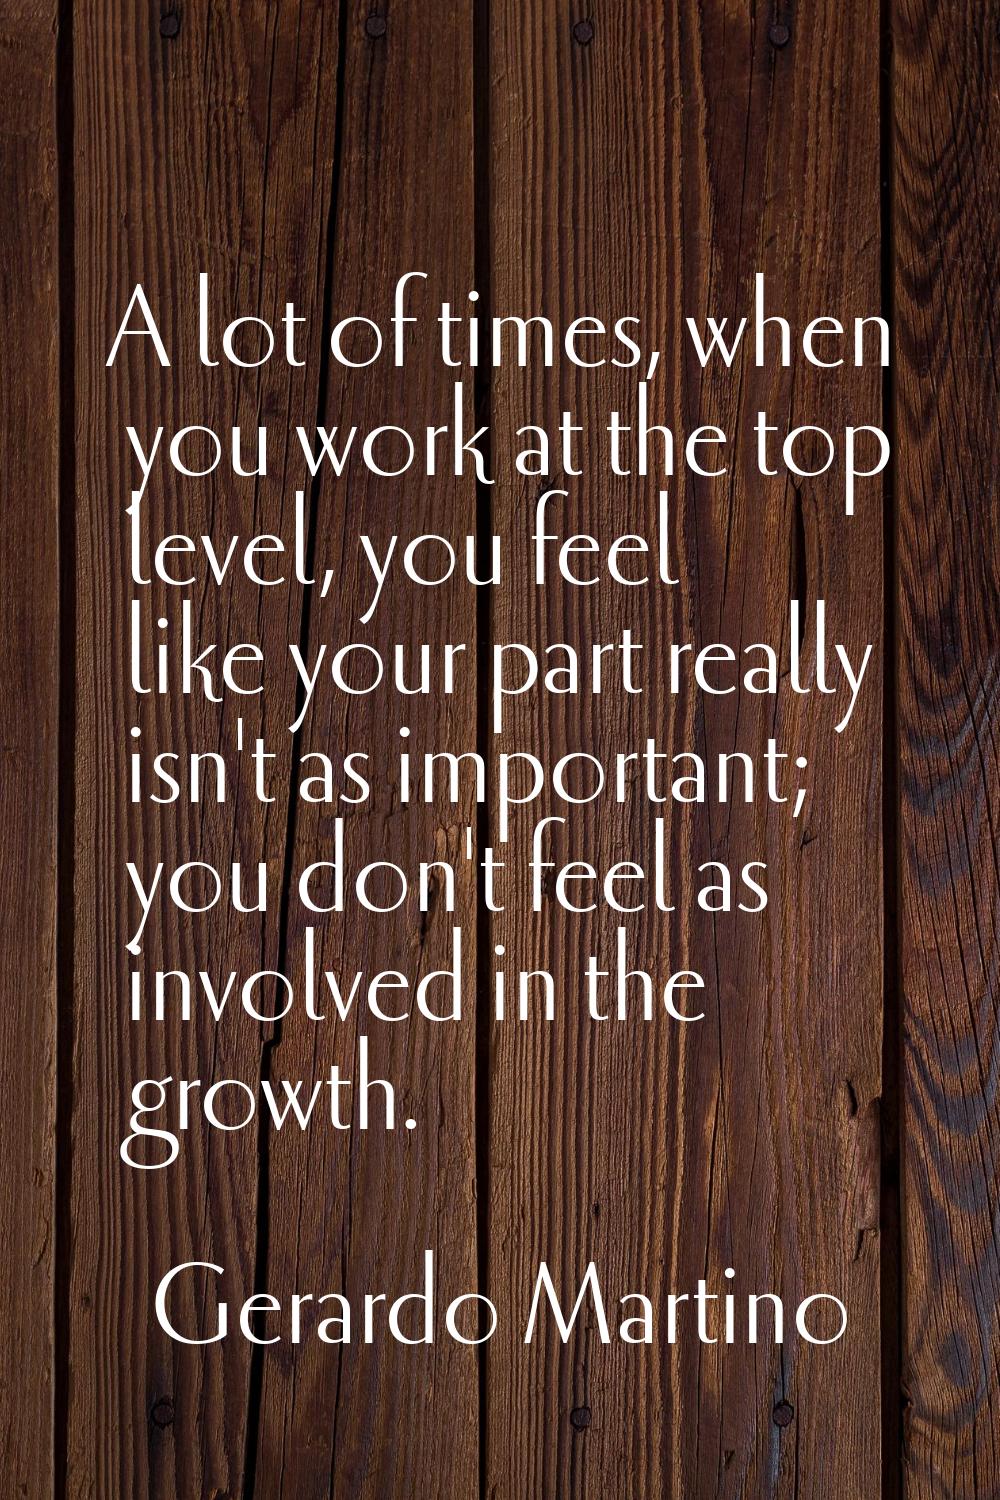 A lot of times, when you work at the top level, you feel like your part really isn't as important; 